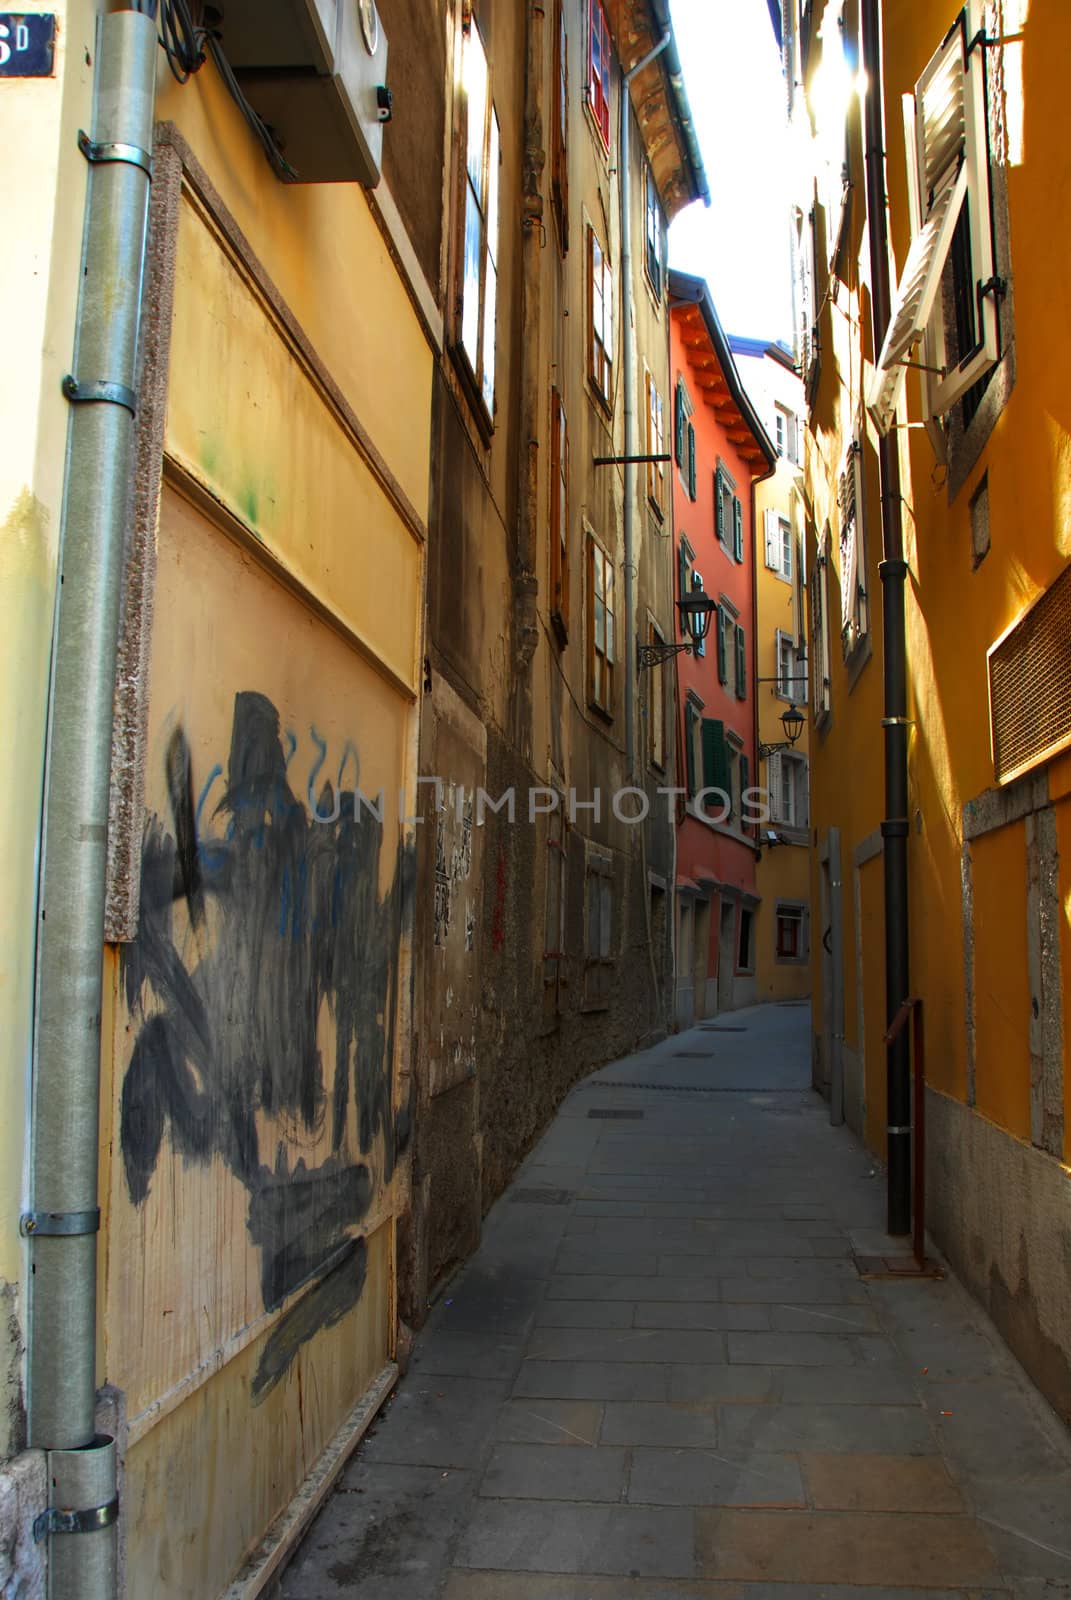 street and architectural details of Trieste, Italy